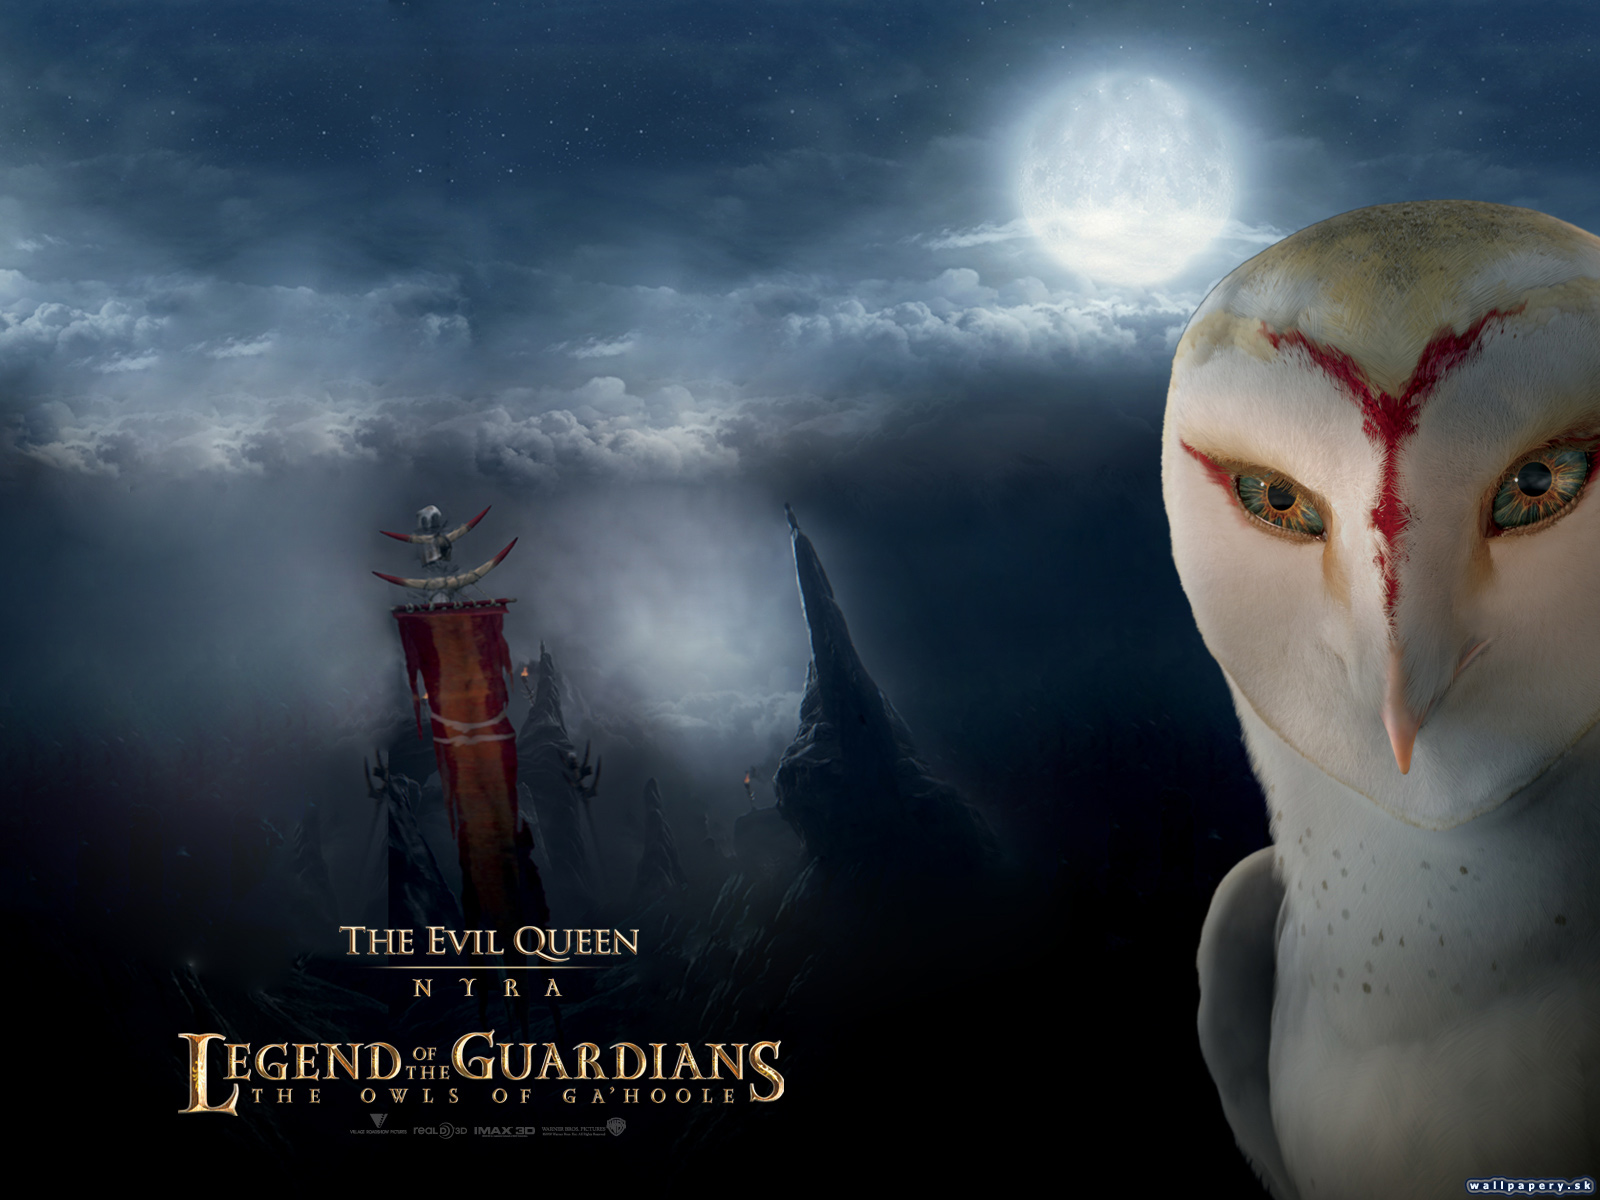 Legend of the Guardians: The Owls of Ga'Hoole - wallpaper 6